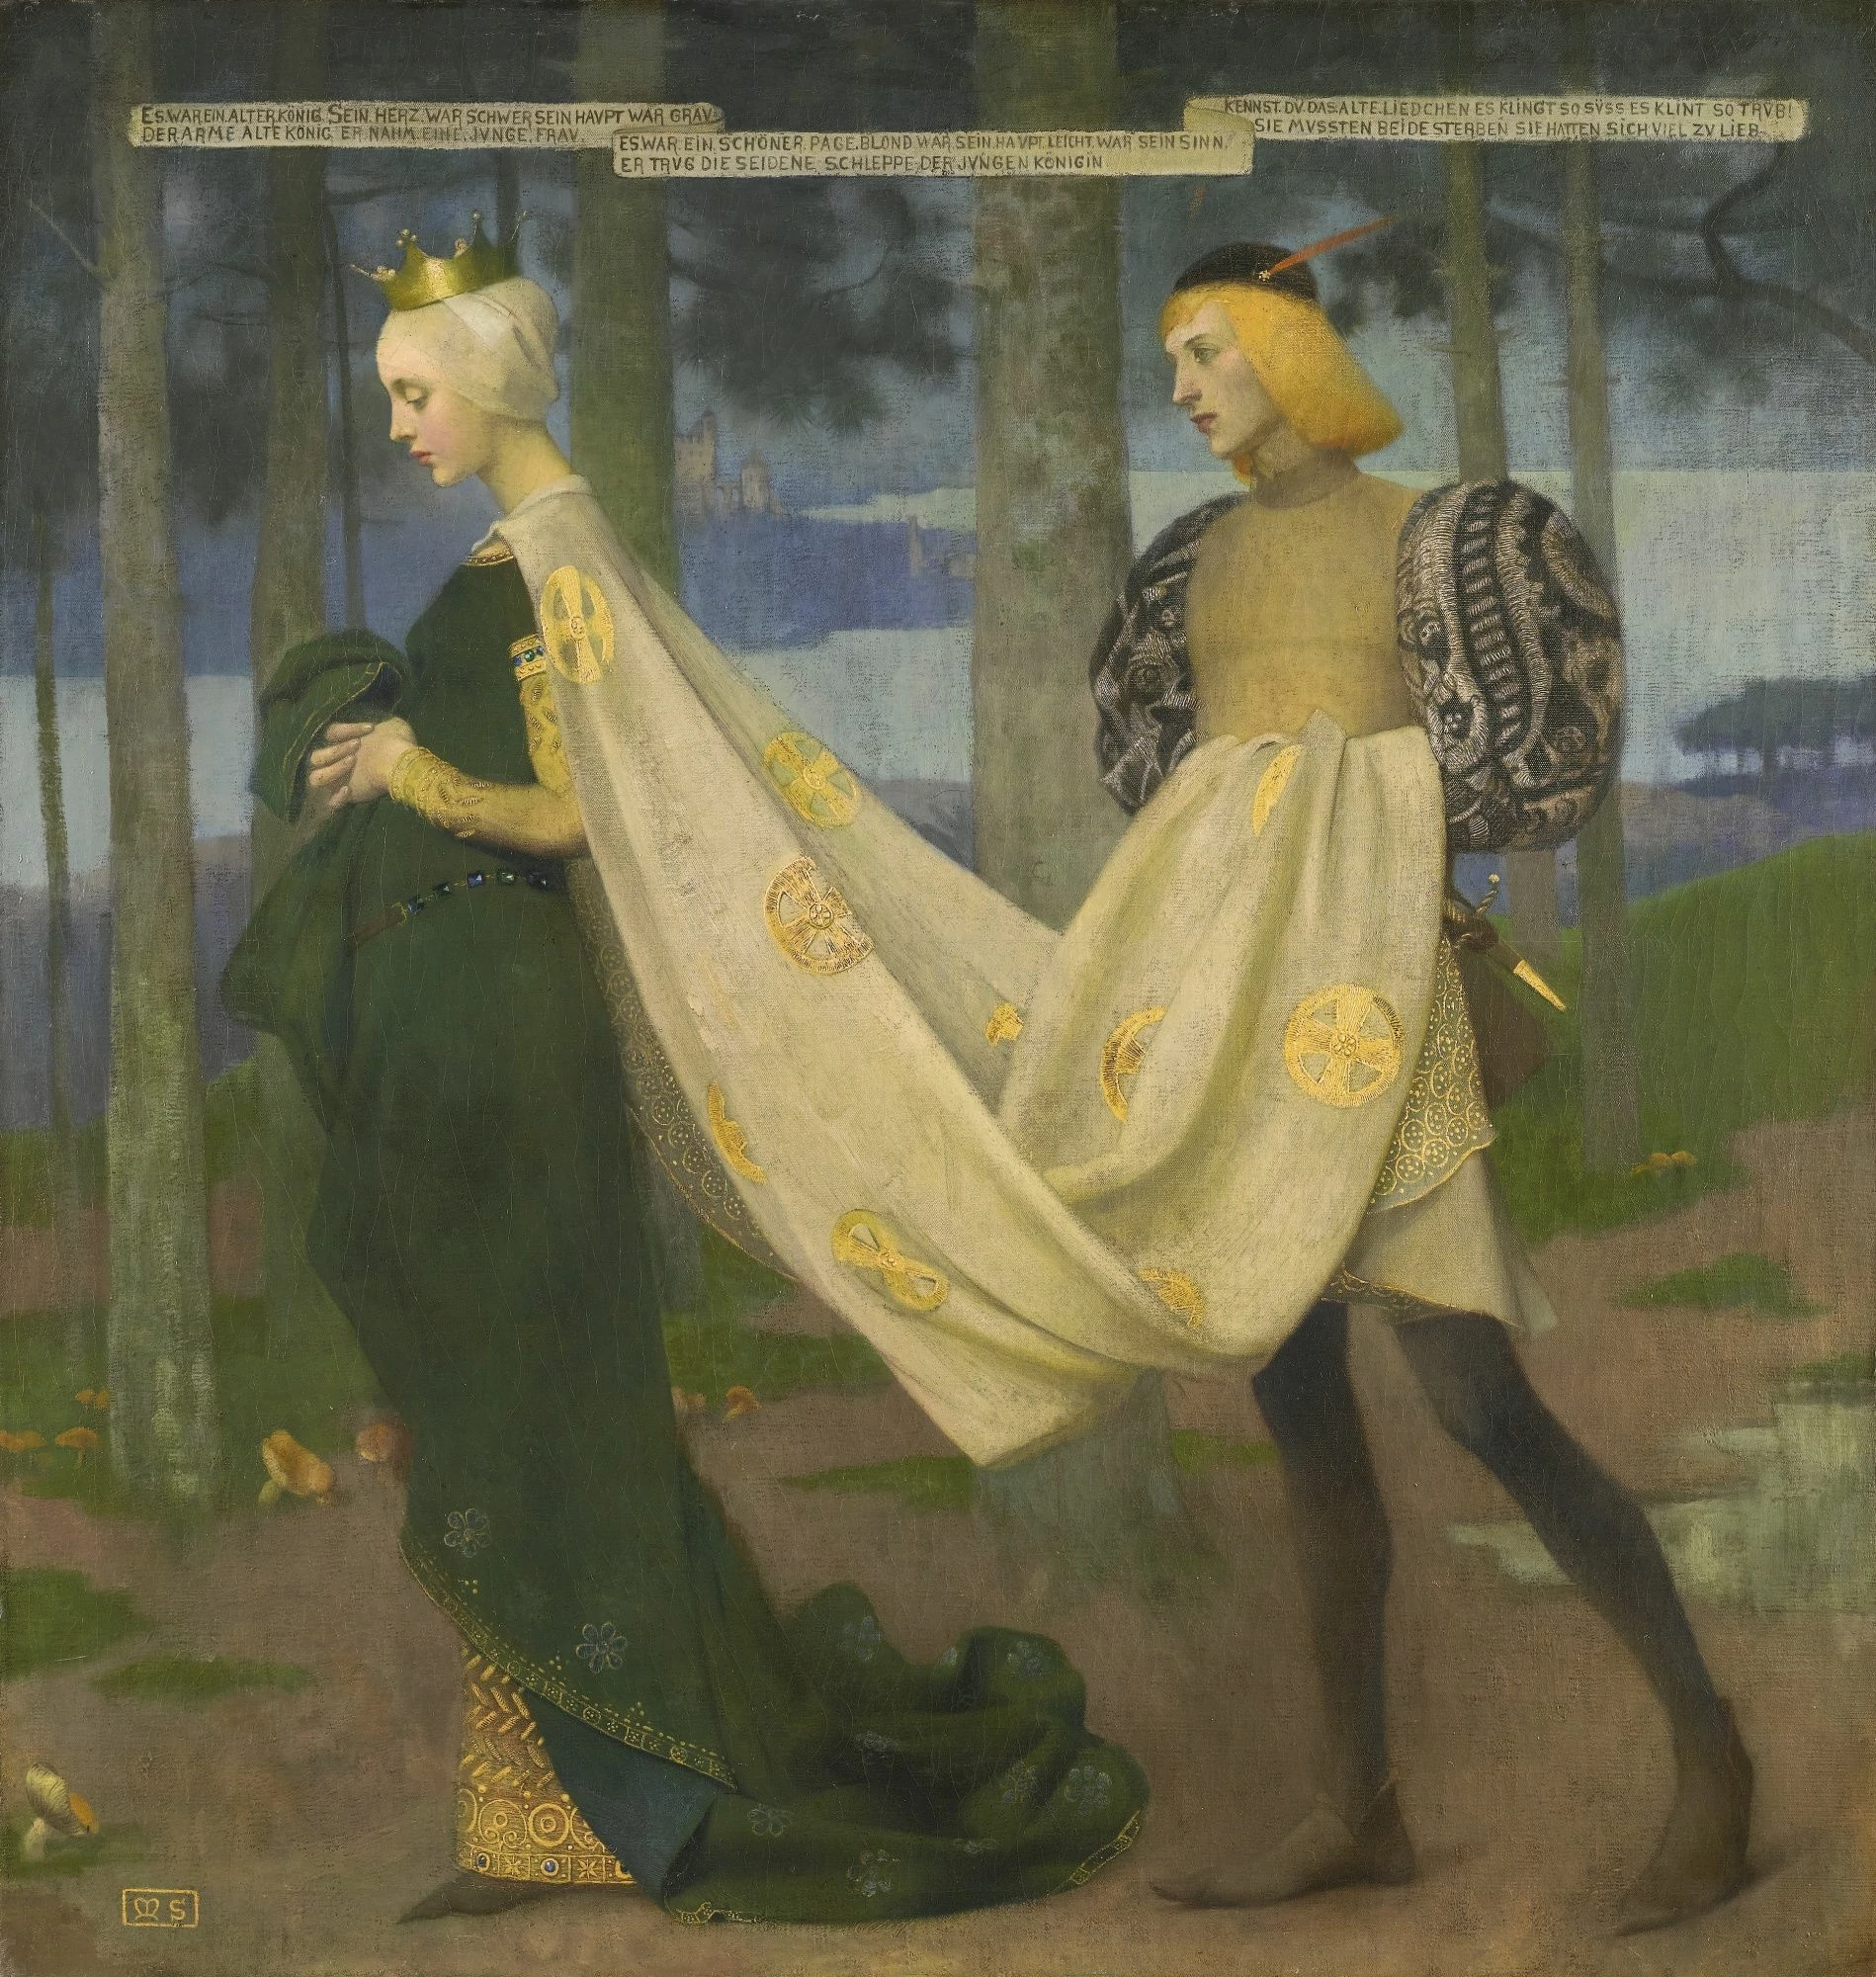 The Queen and the Page, Marianne Stokes